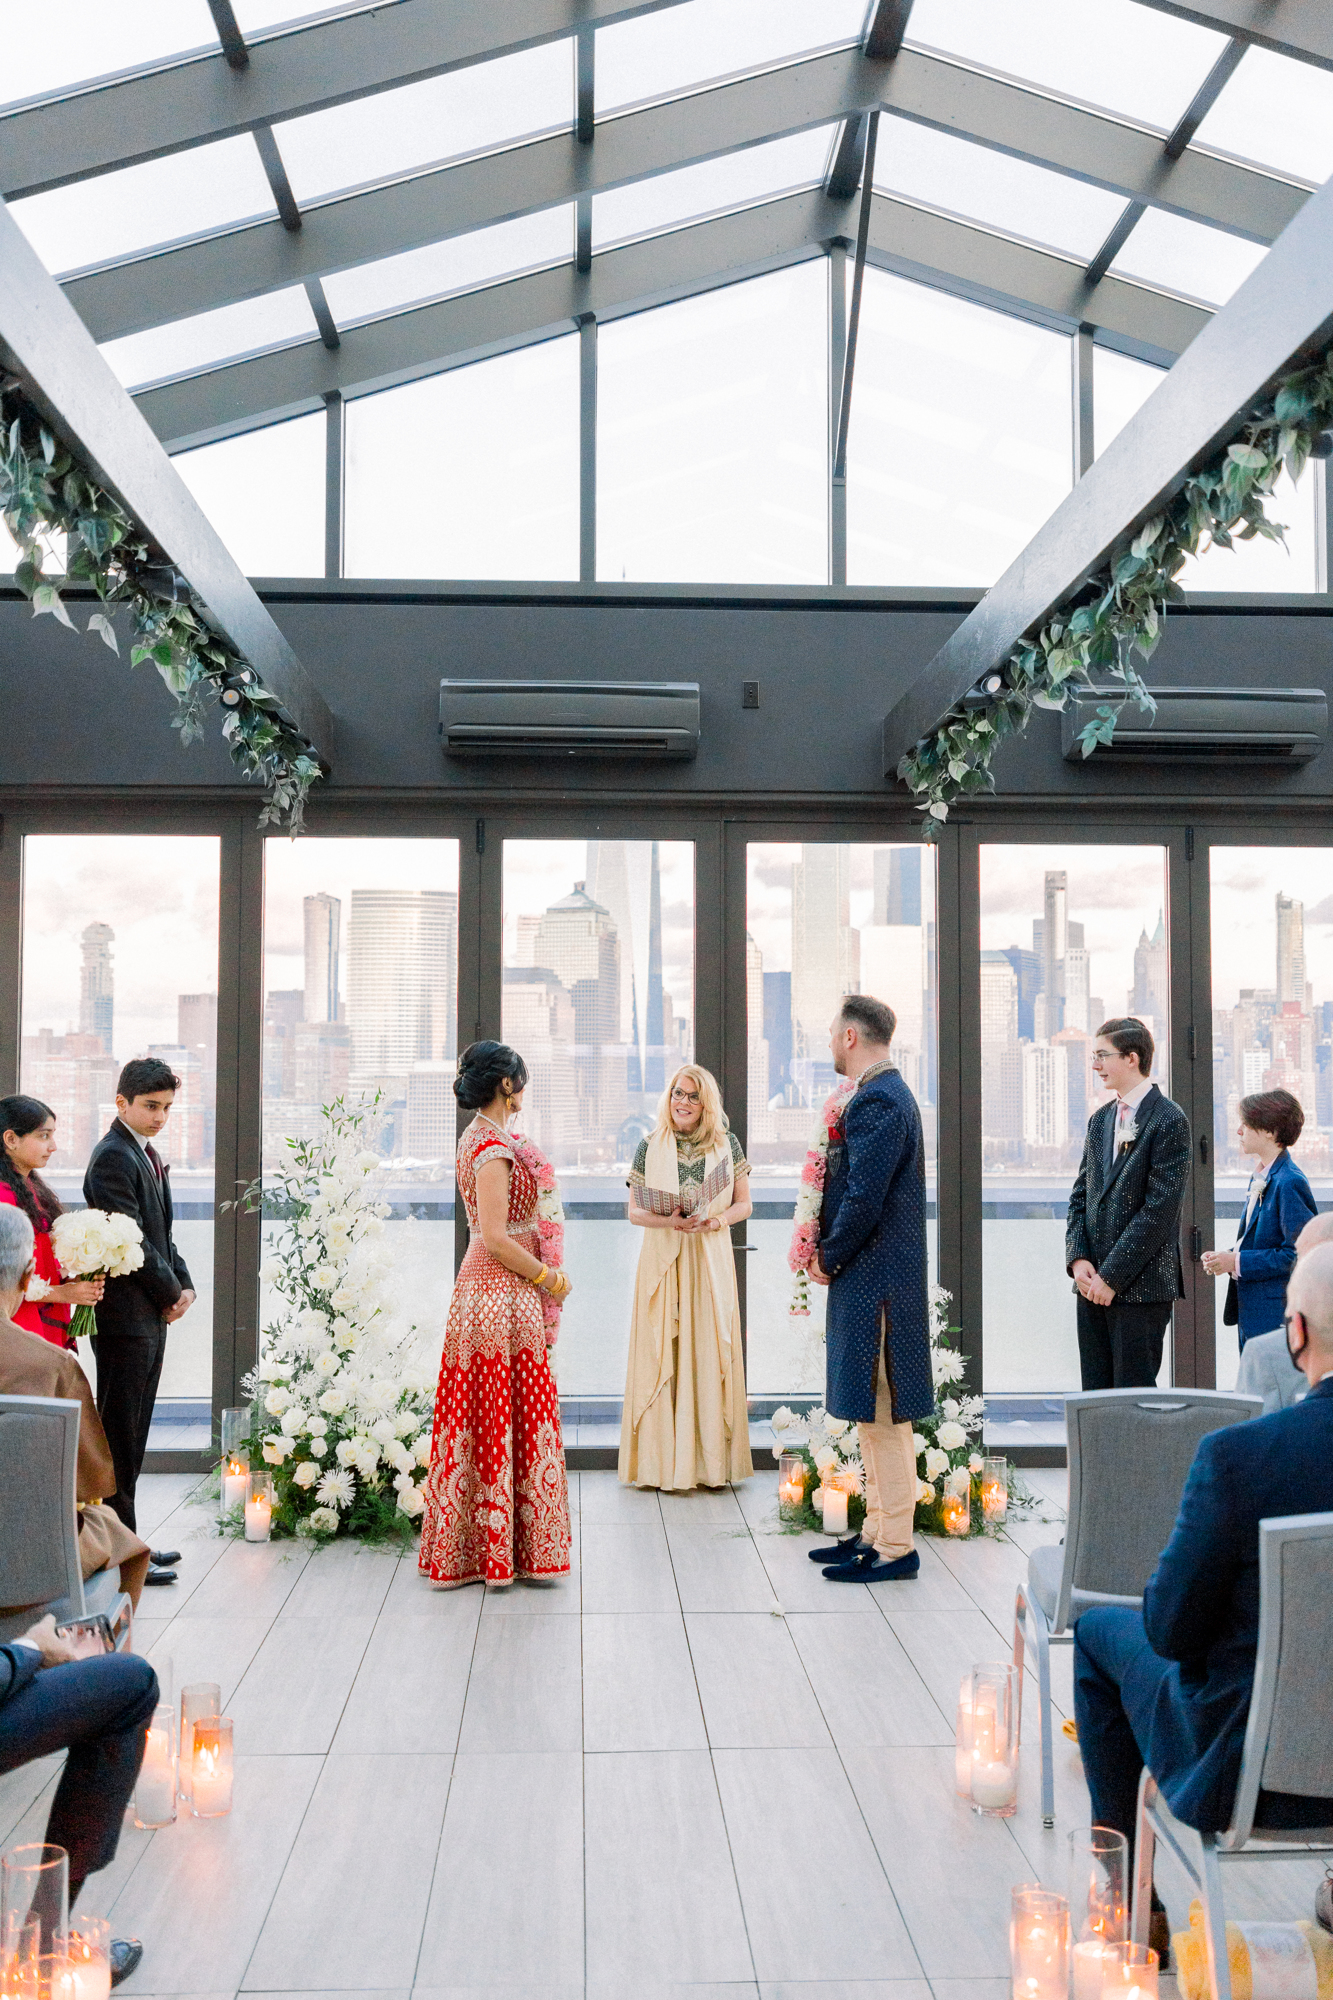 Beautiful NJ winter wedding indoors at the Rooftop at Exchange Place